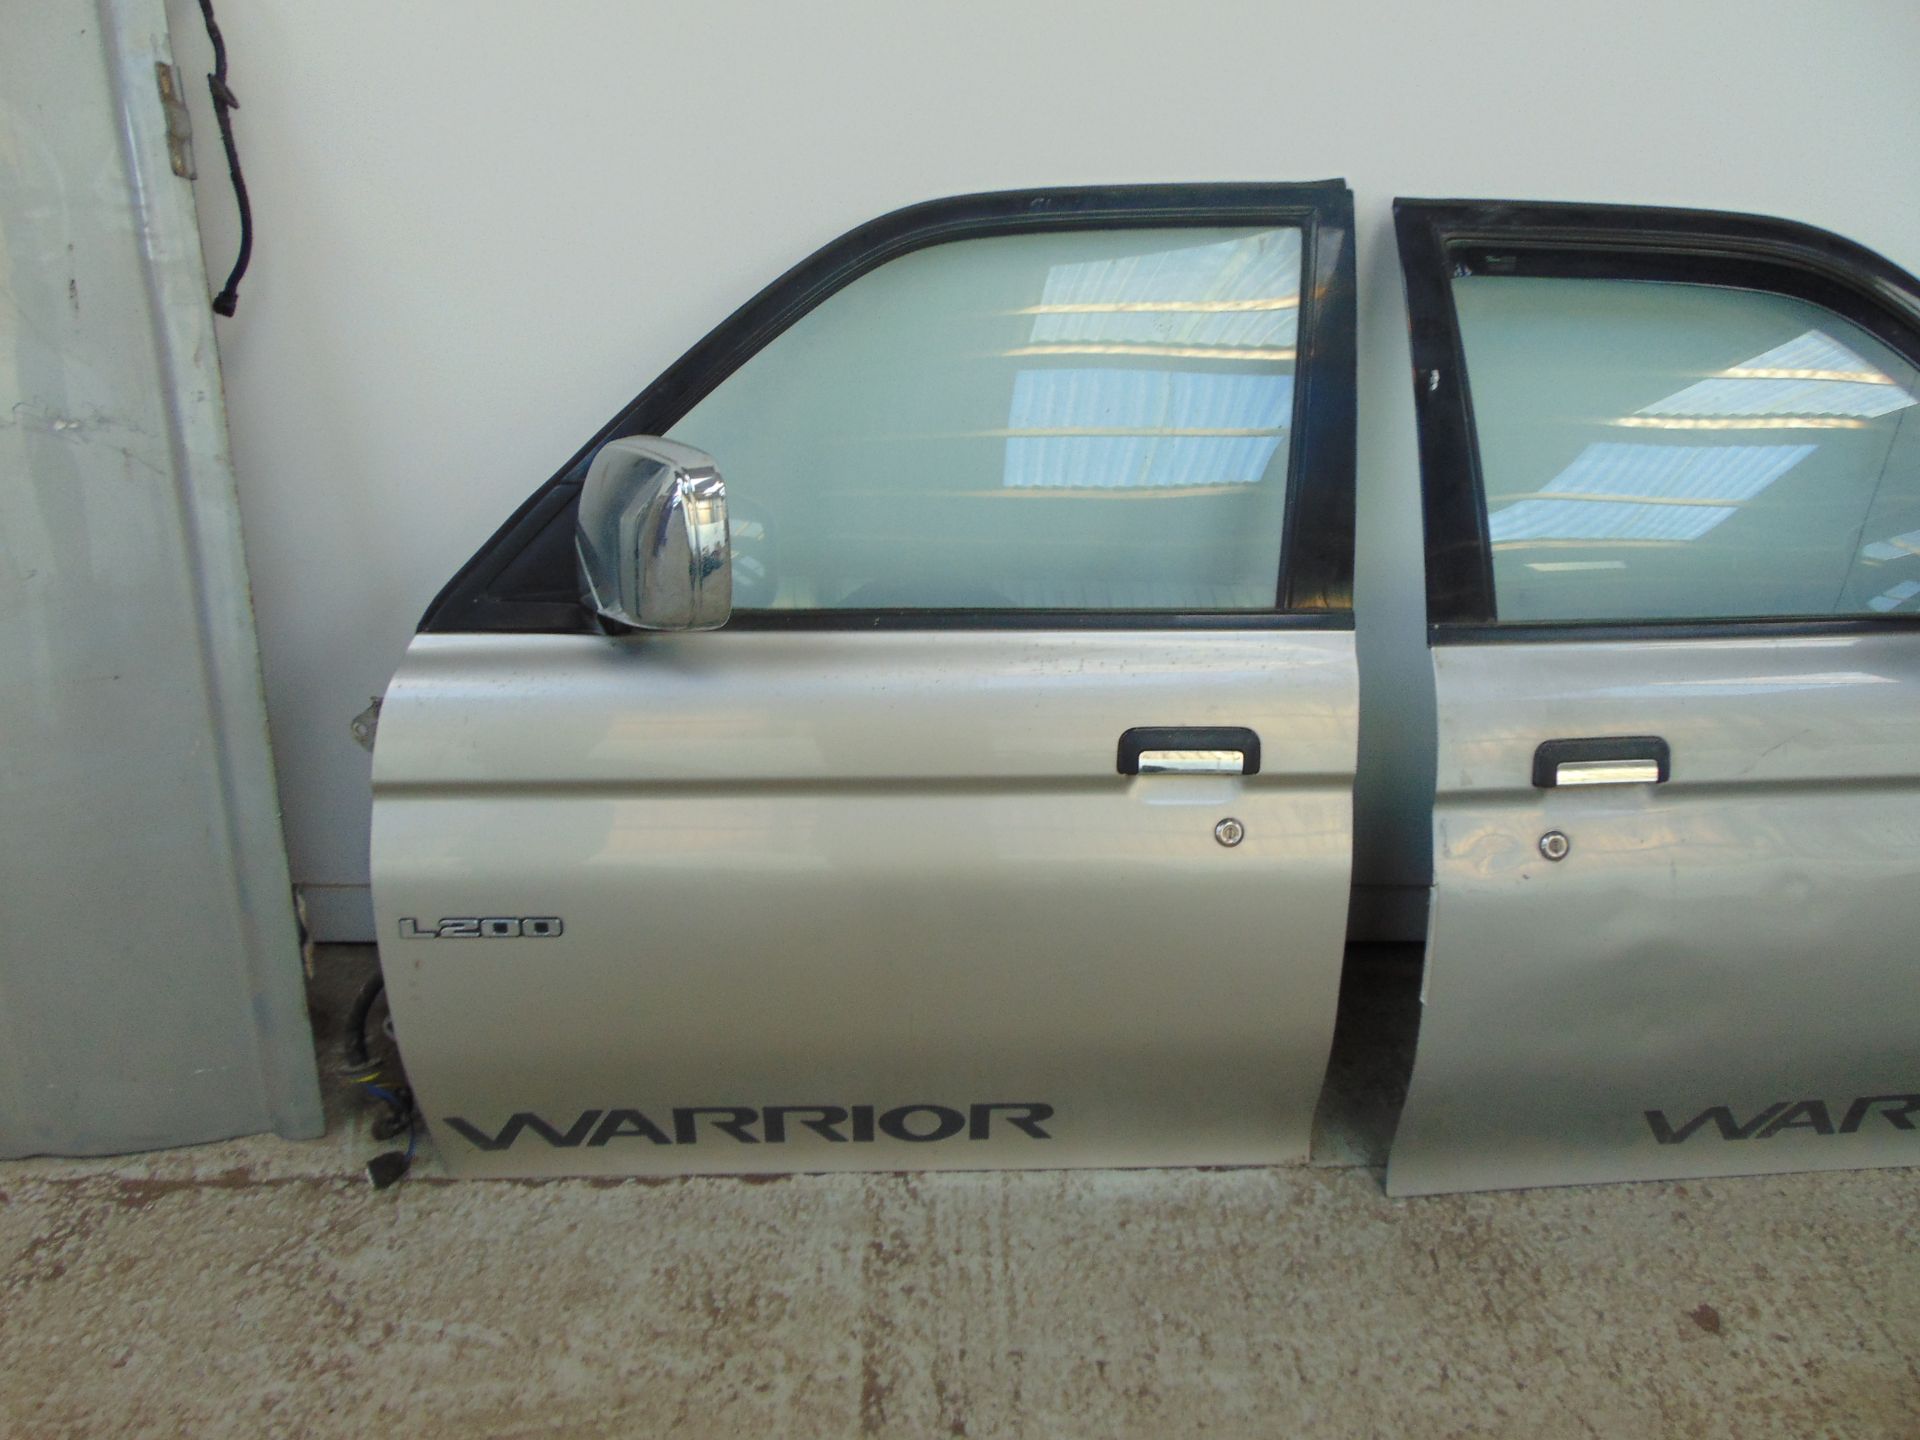 L200 warrior doors in silver o/s front o/s rear n/s front n/s rear and tailgate - Image 5 of 12